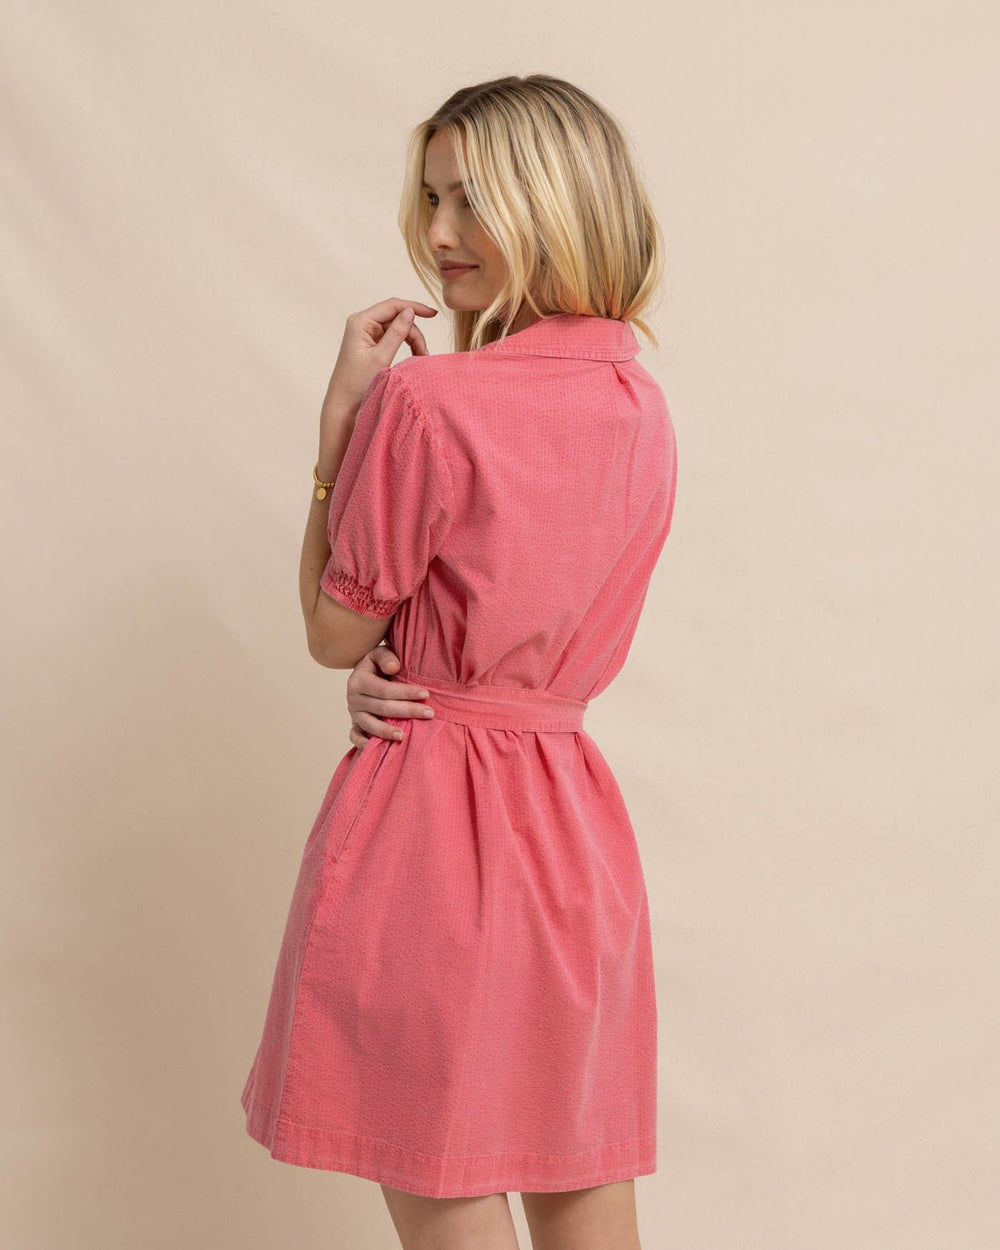 The back view of the Southern Tide Calan Washed Seersucker Dress by Southern Tide - Camelia Rose Pink